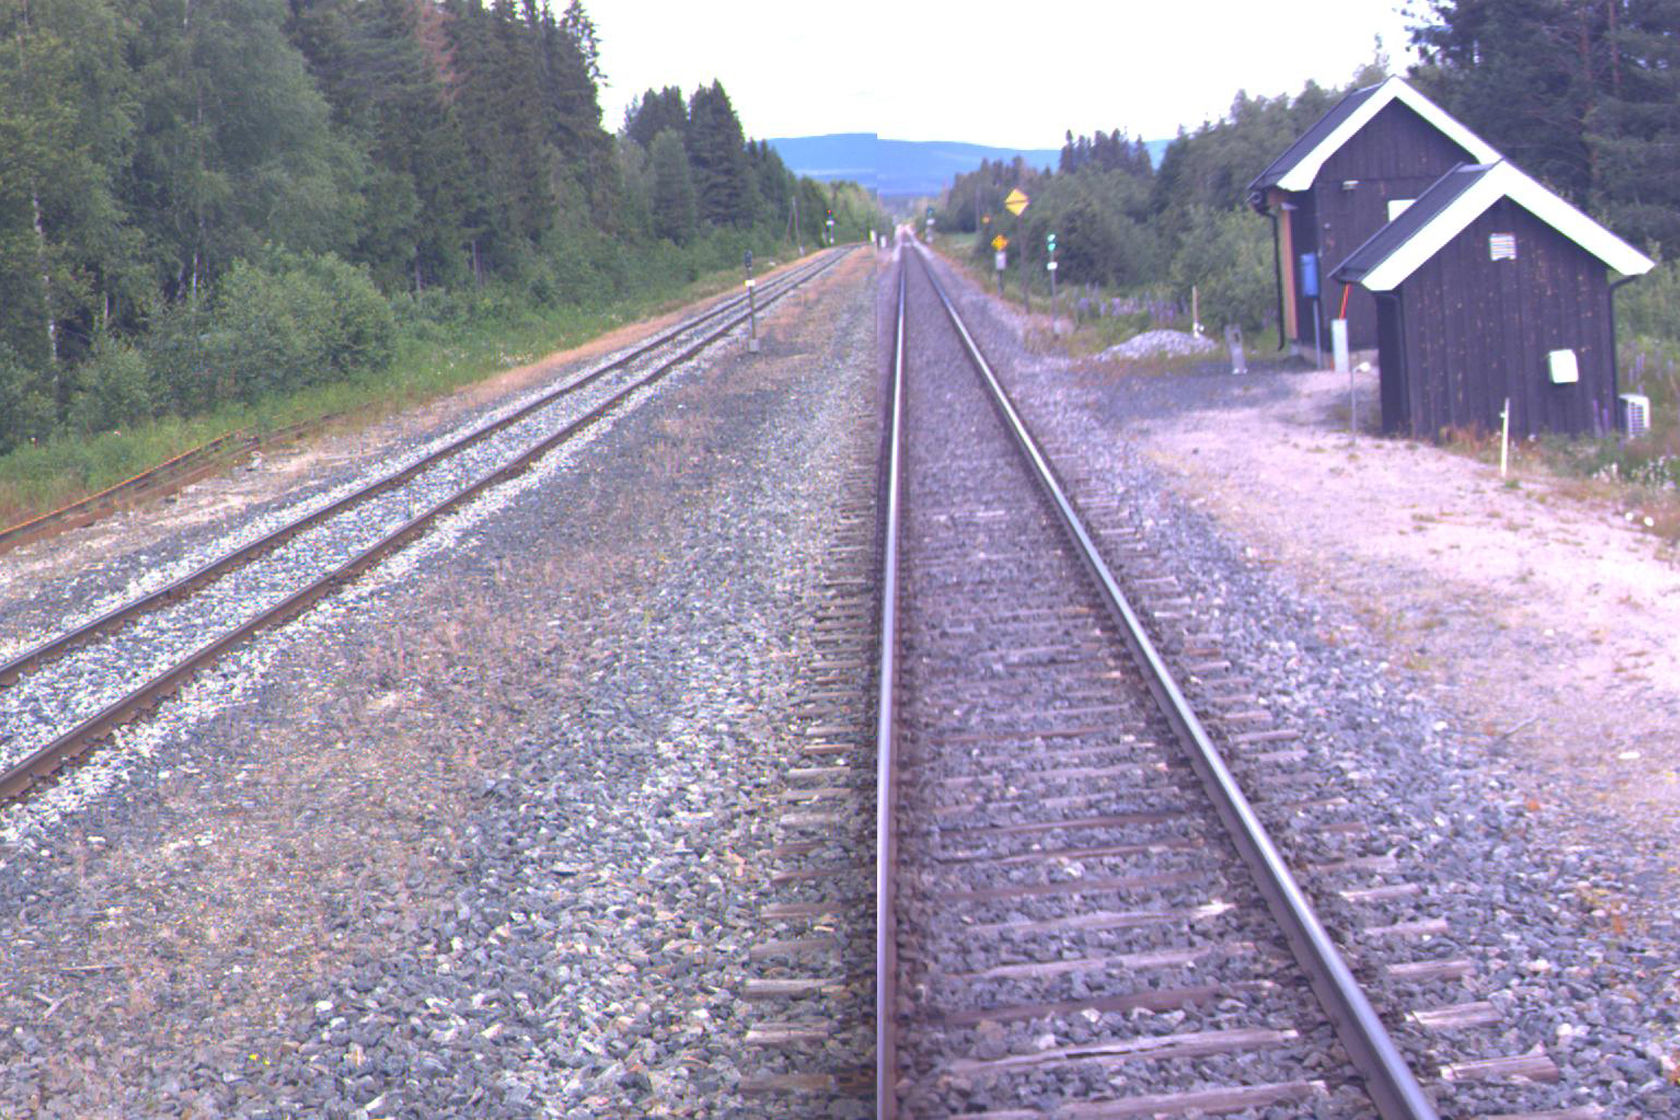 Tracks and buildings at Rudstad station